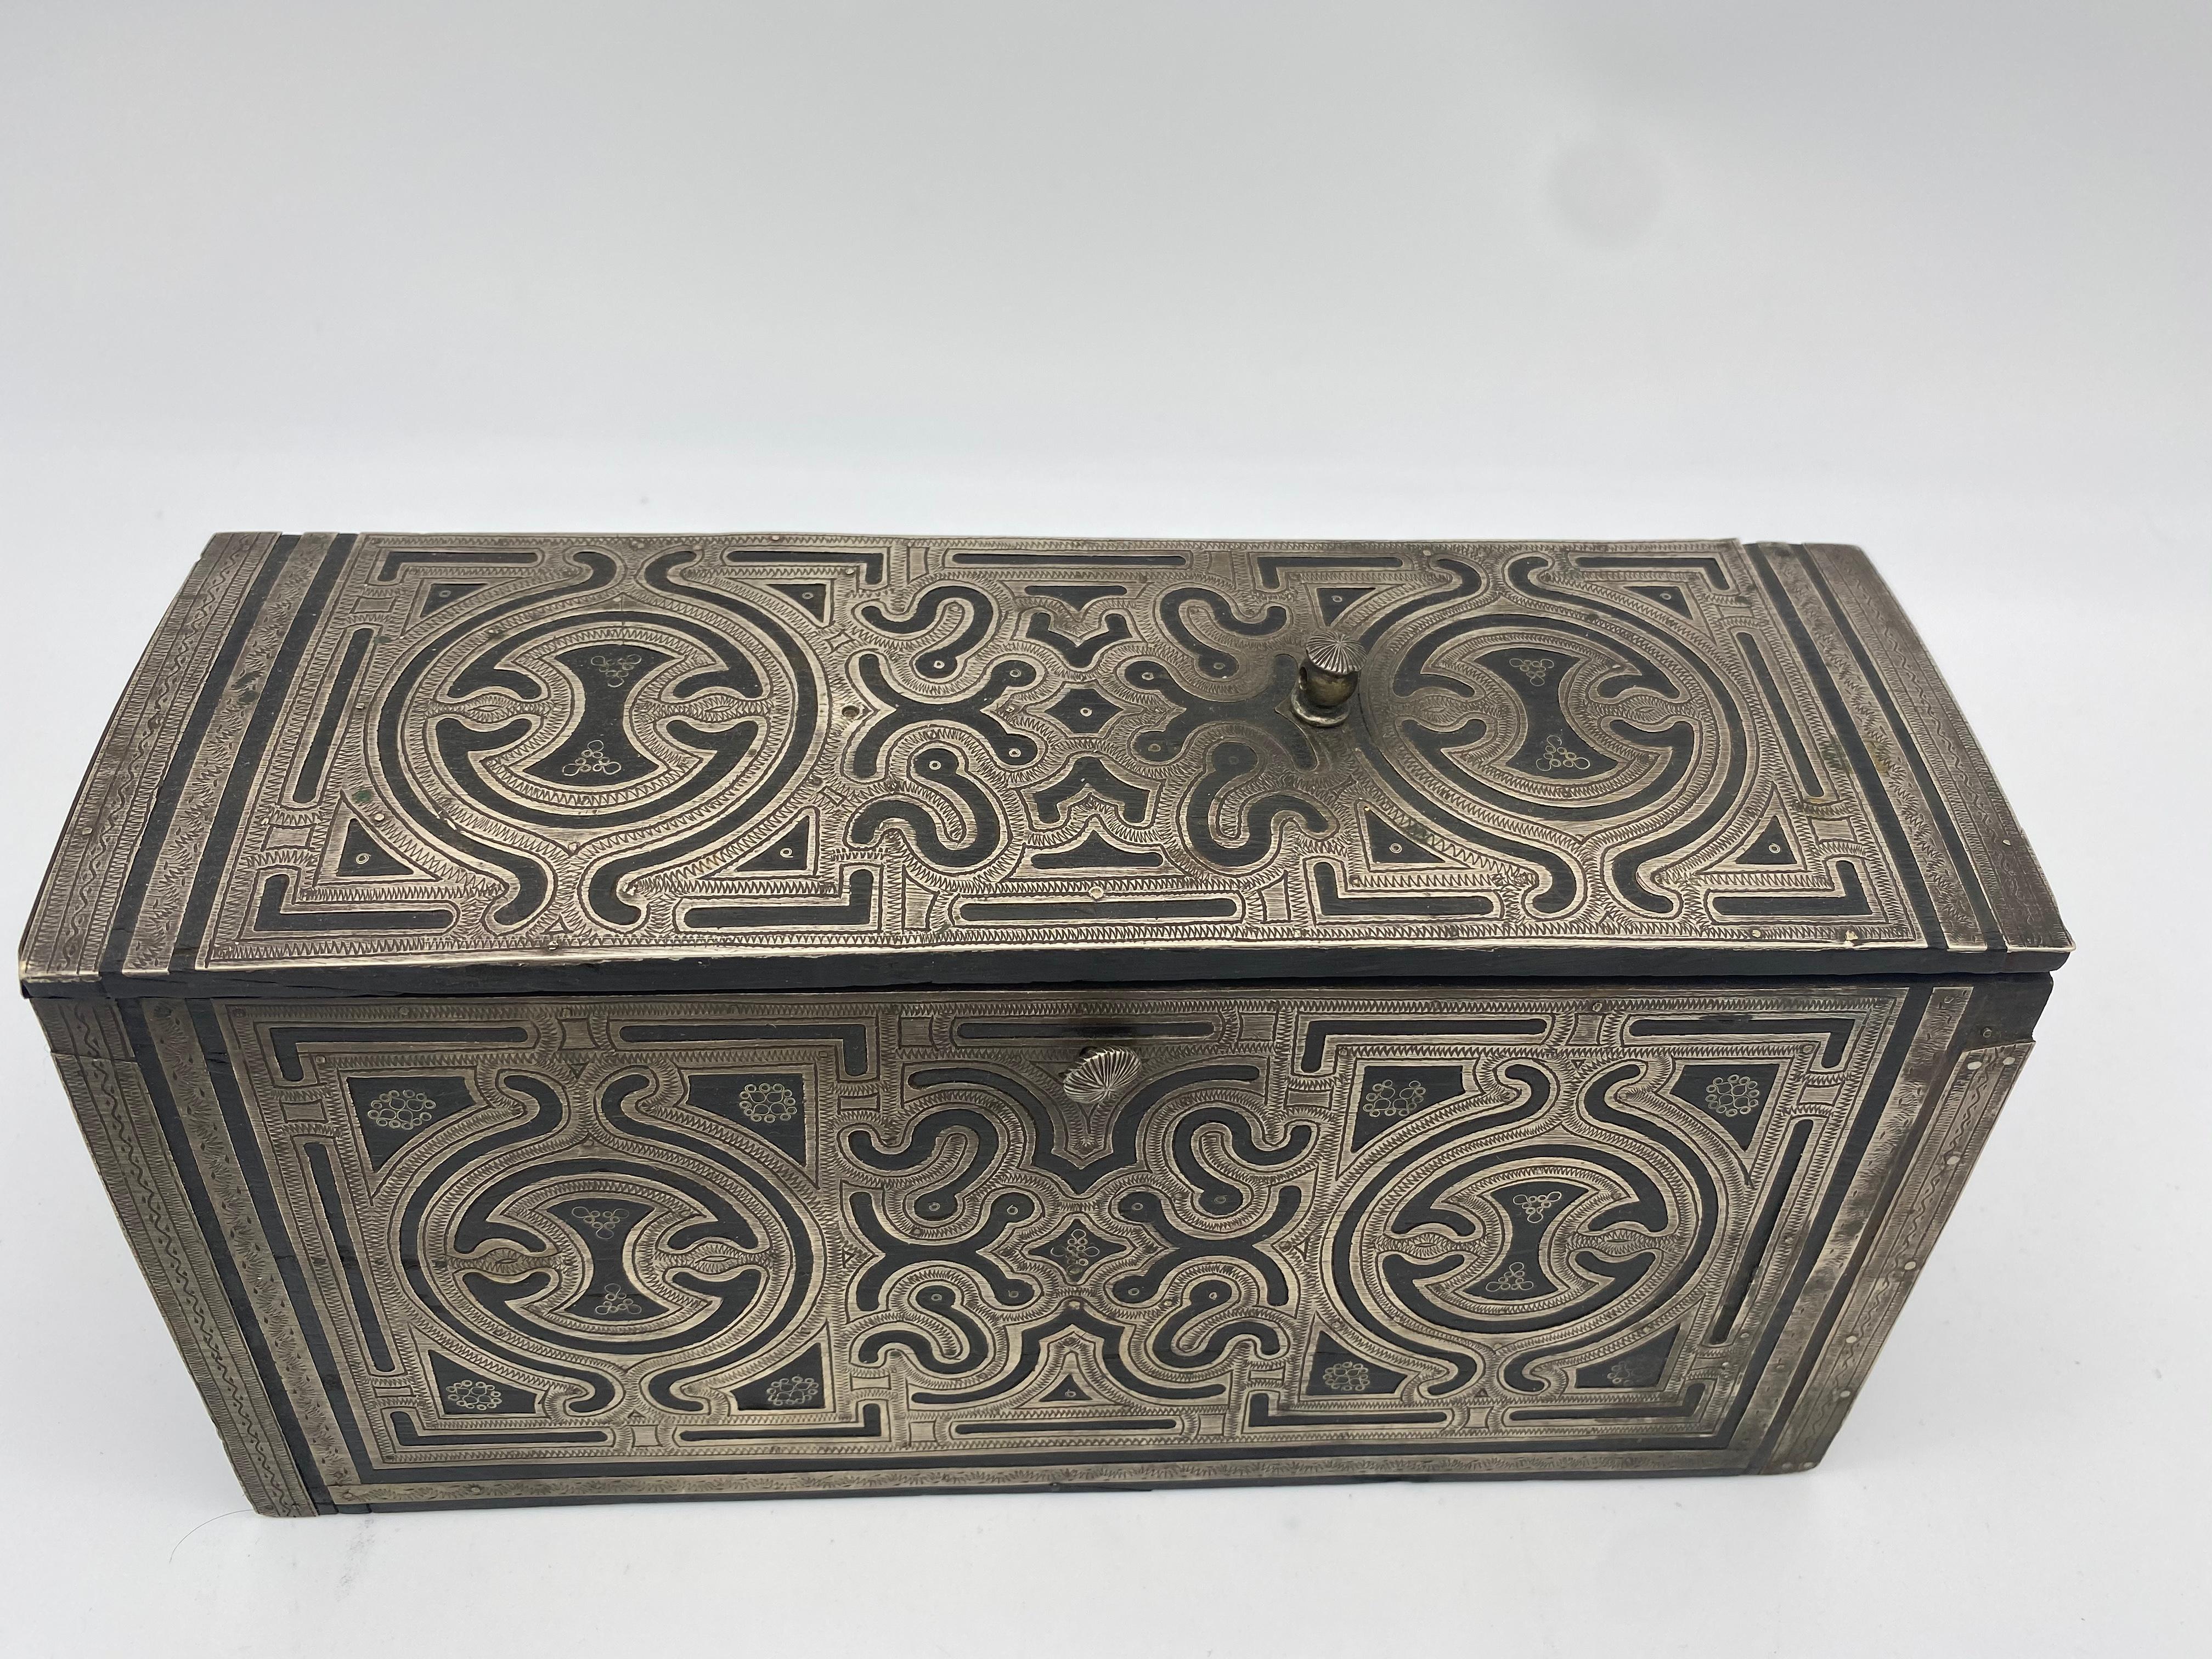 Antique silver outer layer on wood box. Extremely beautiful and very hard to find with intricate geometrical designs. Top of box width is 3 in. Bottom of box width is 4.5 in. See image.